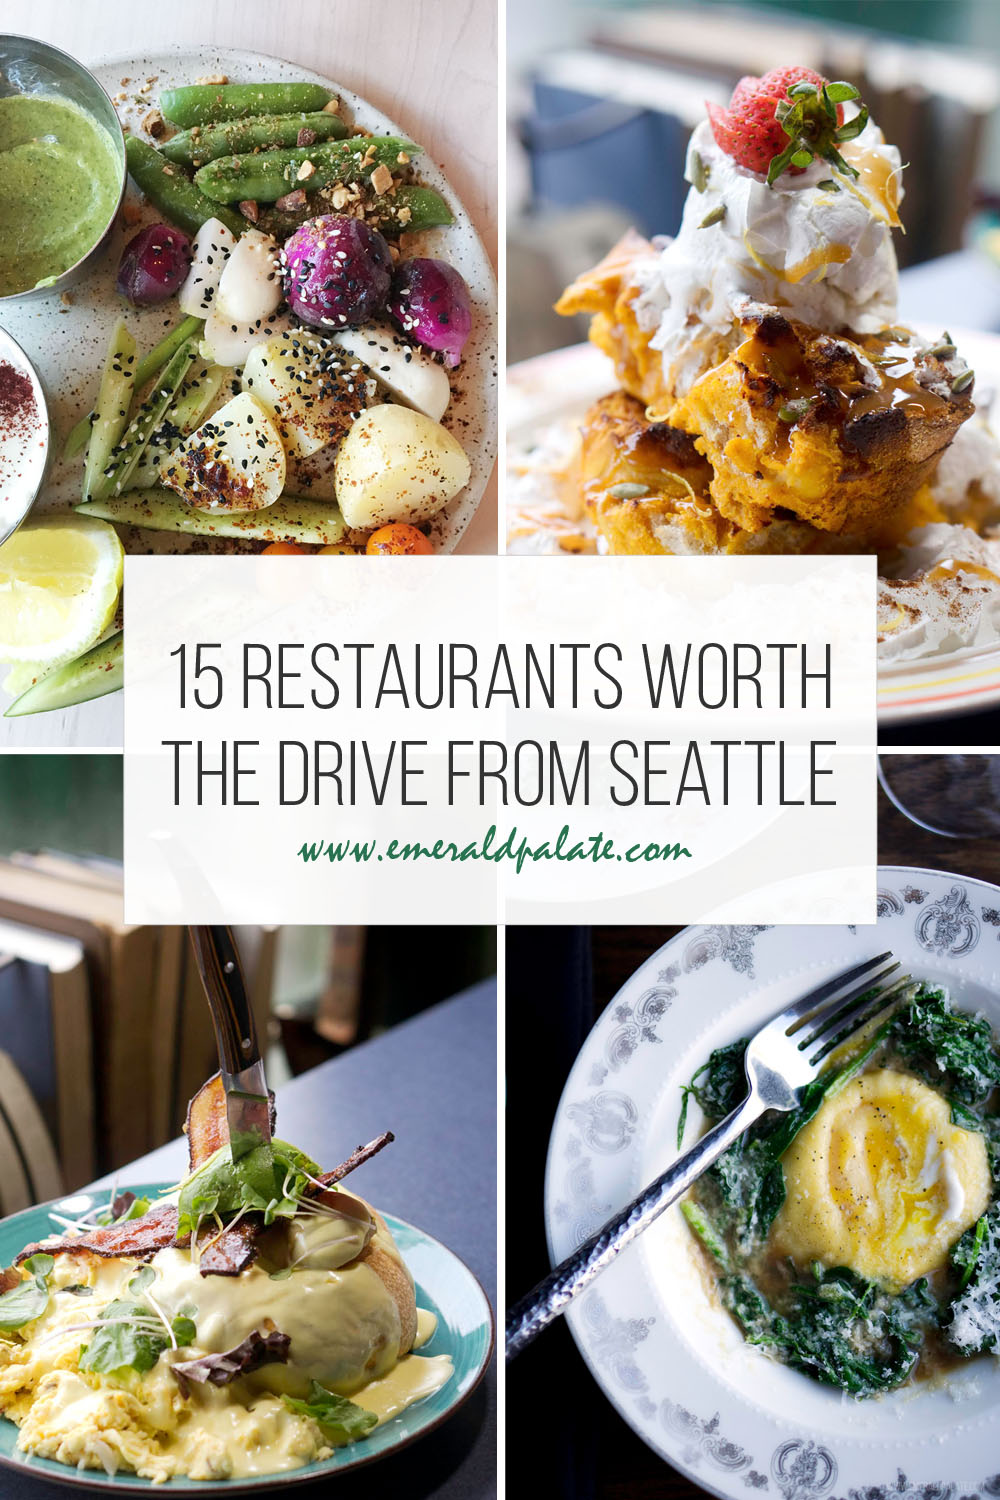 15 restaurants worth the drive from Seattle